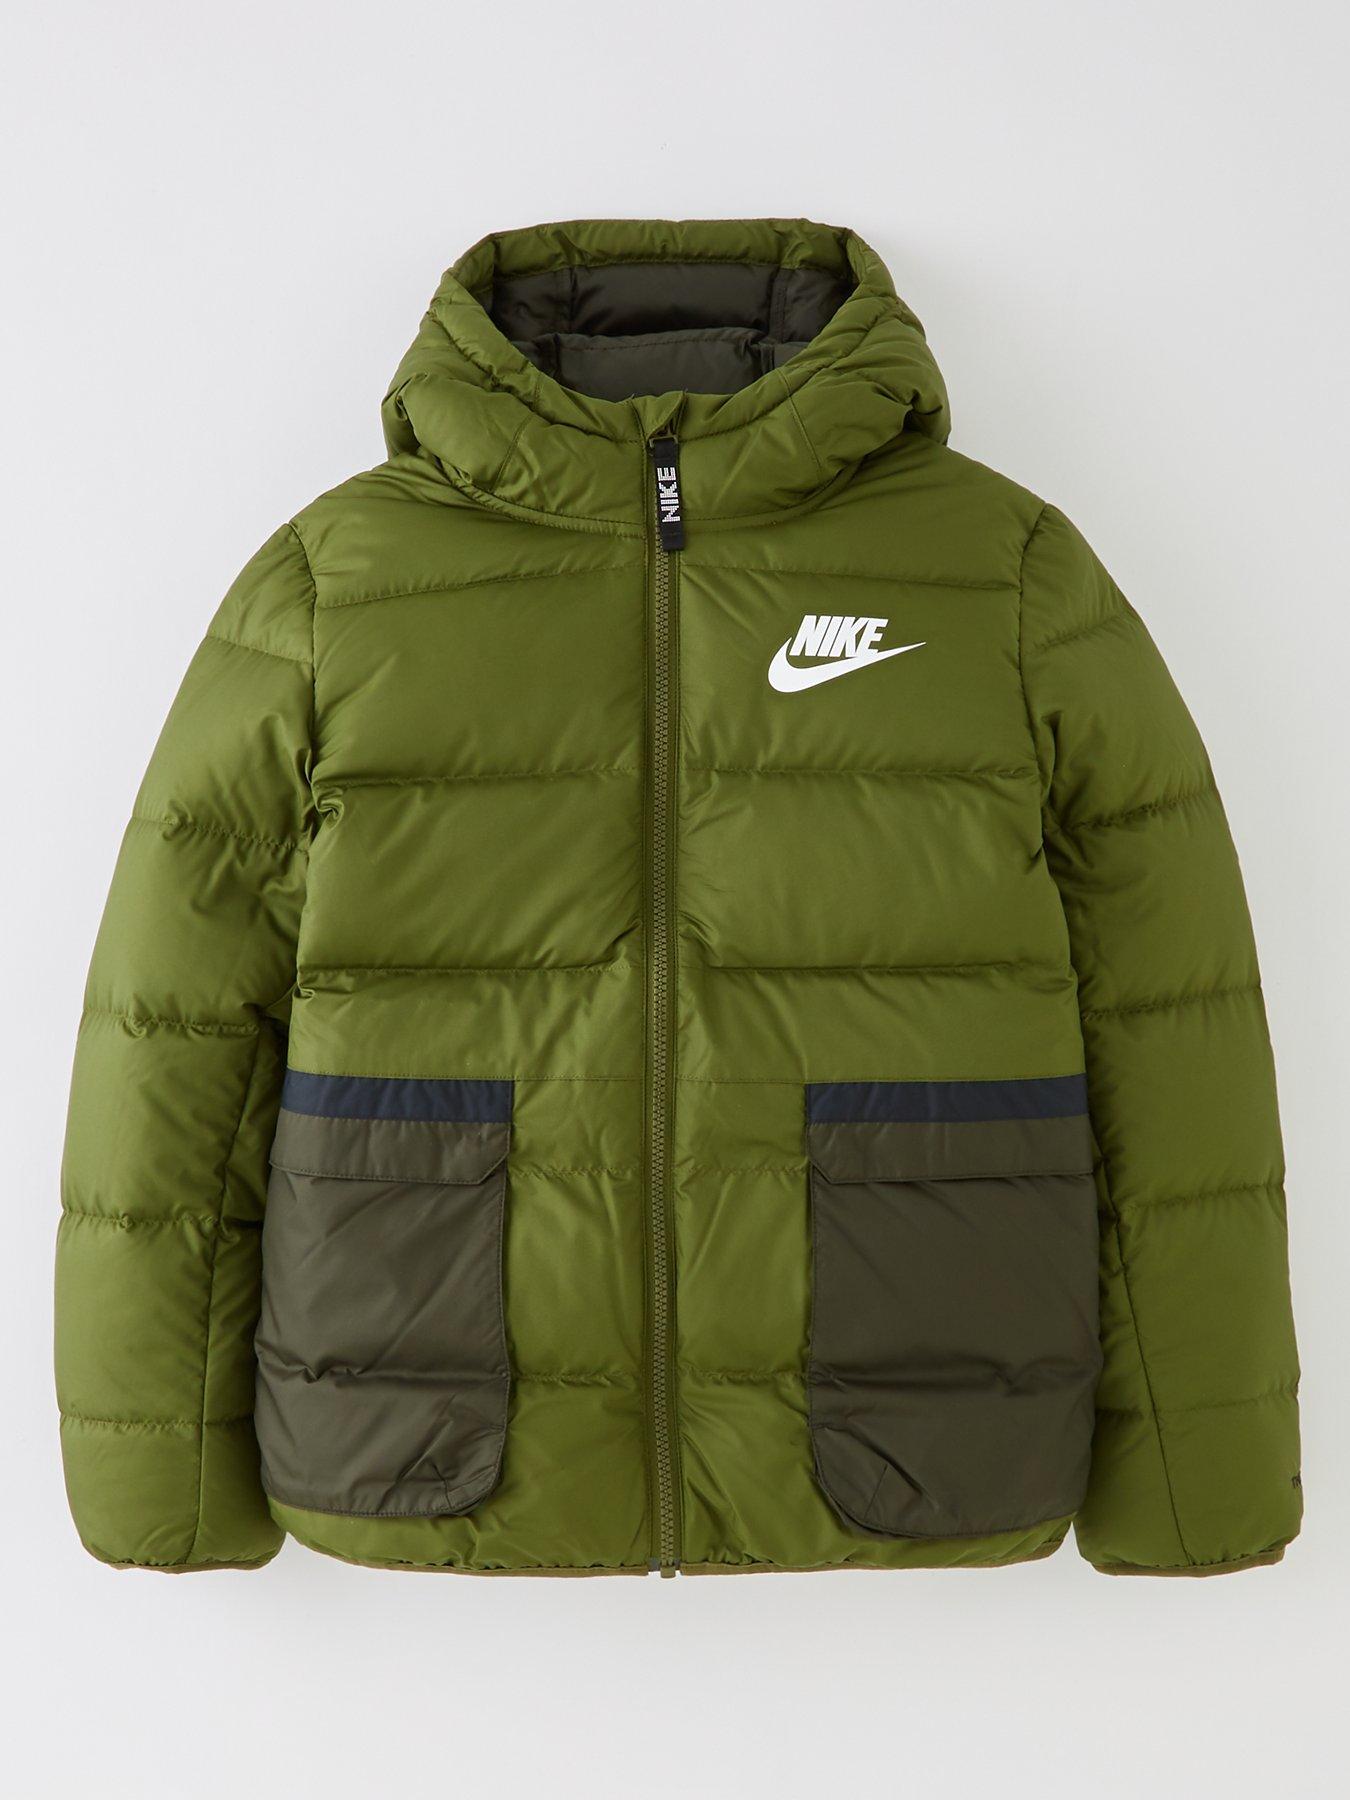 puerta Evaluación Gama de Nike Unisex NSW Therma-FIT Downfall Jacket - Green/White | littlewoods.com